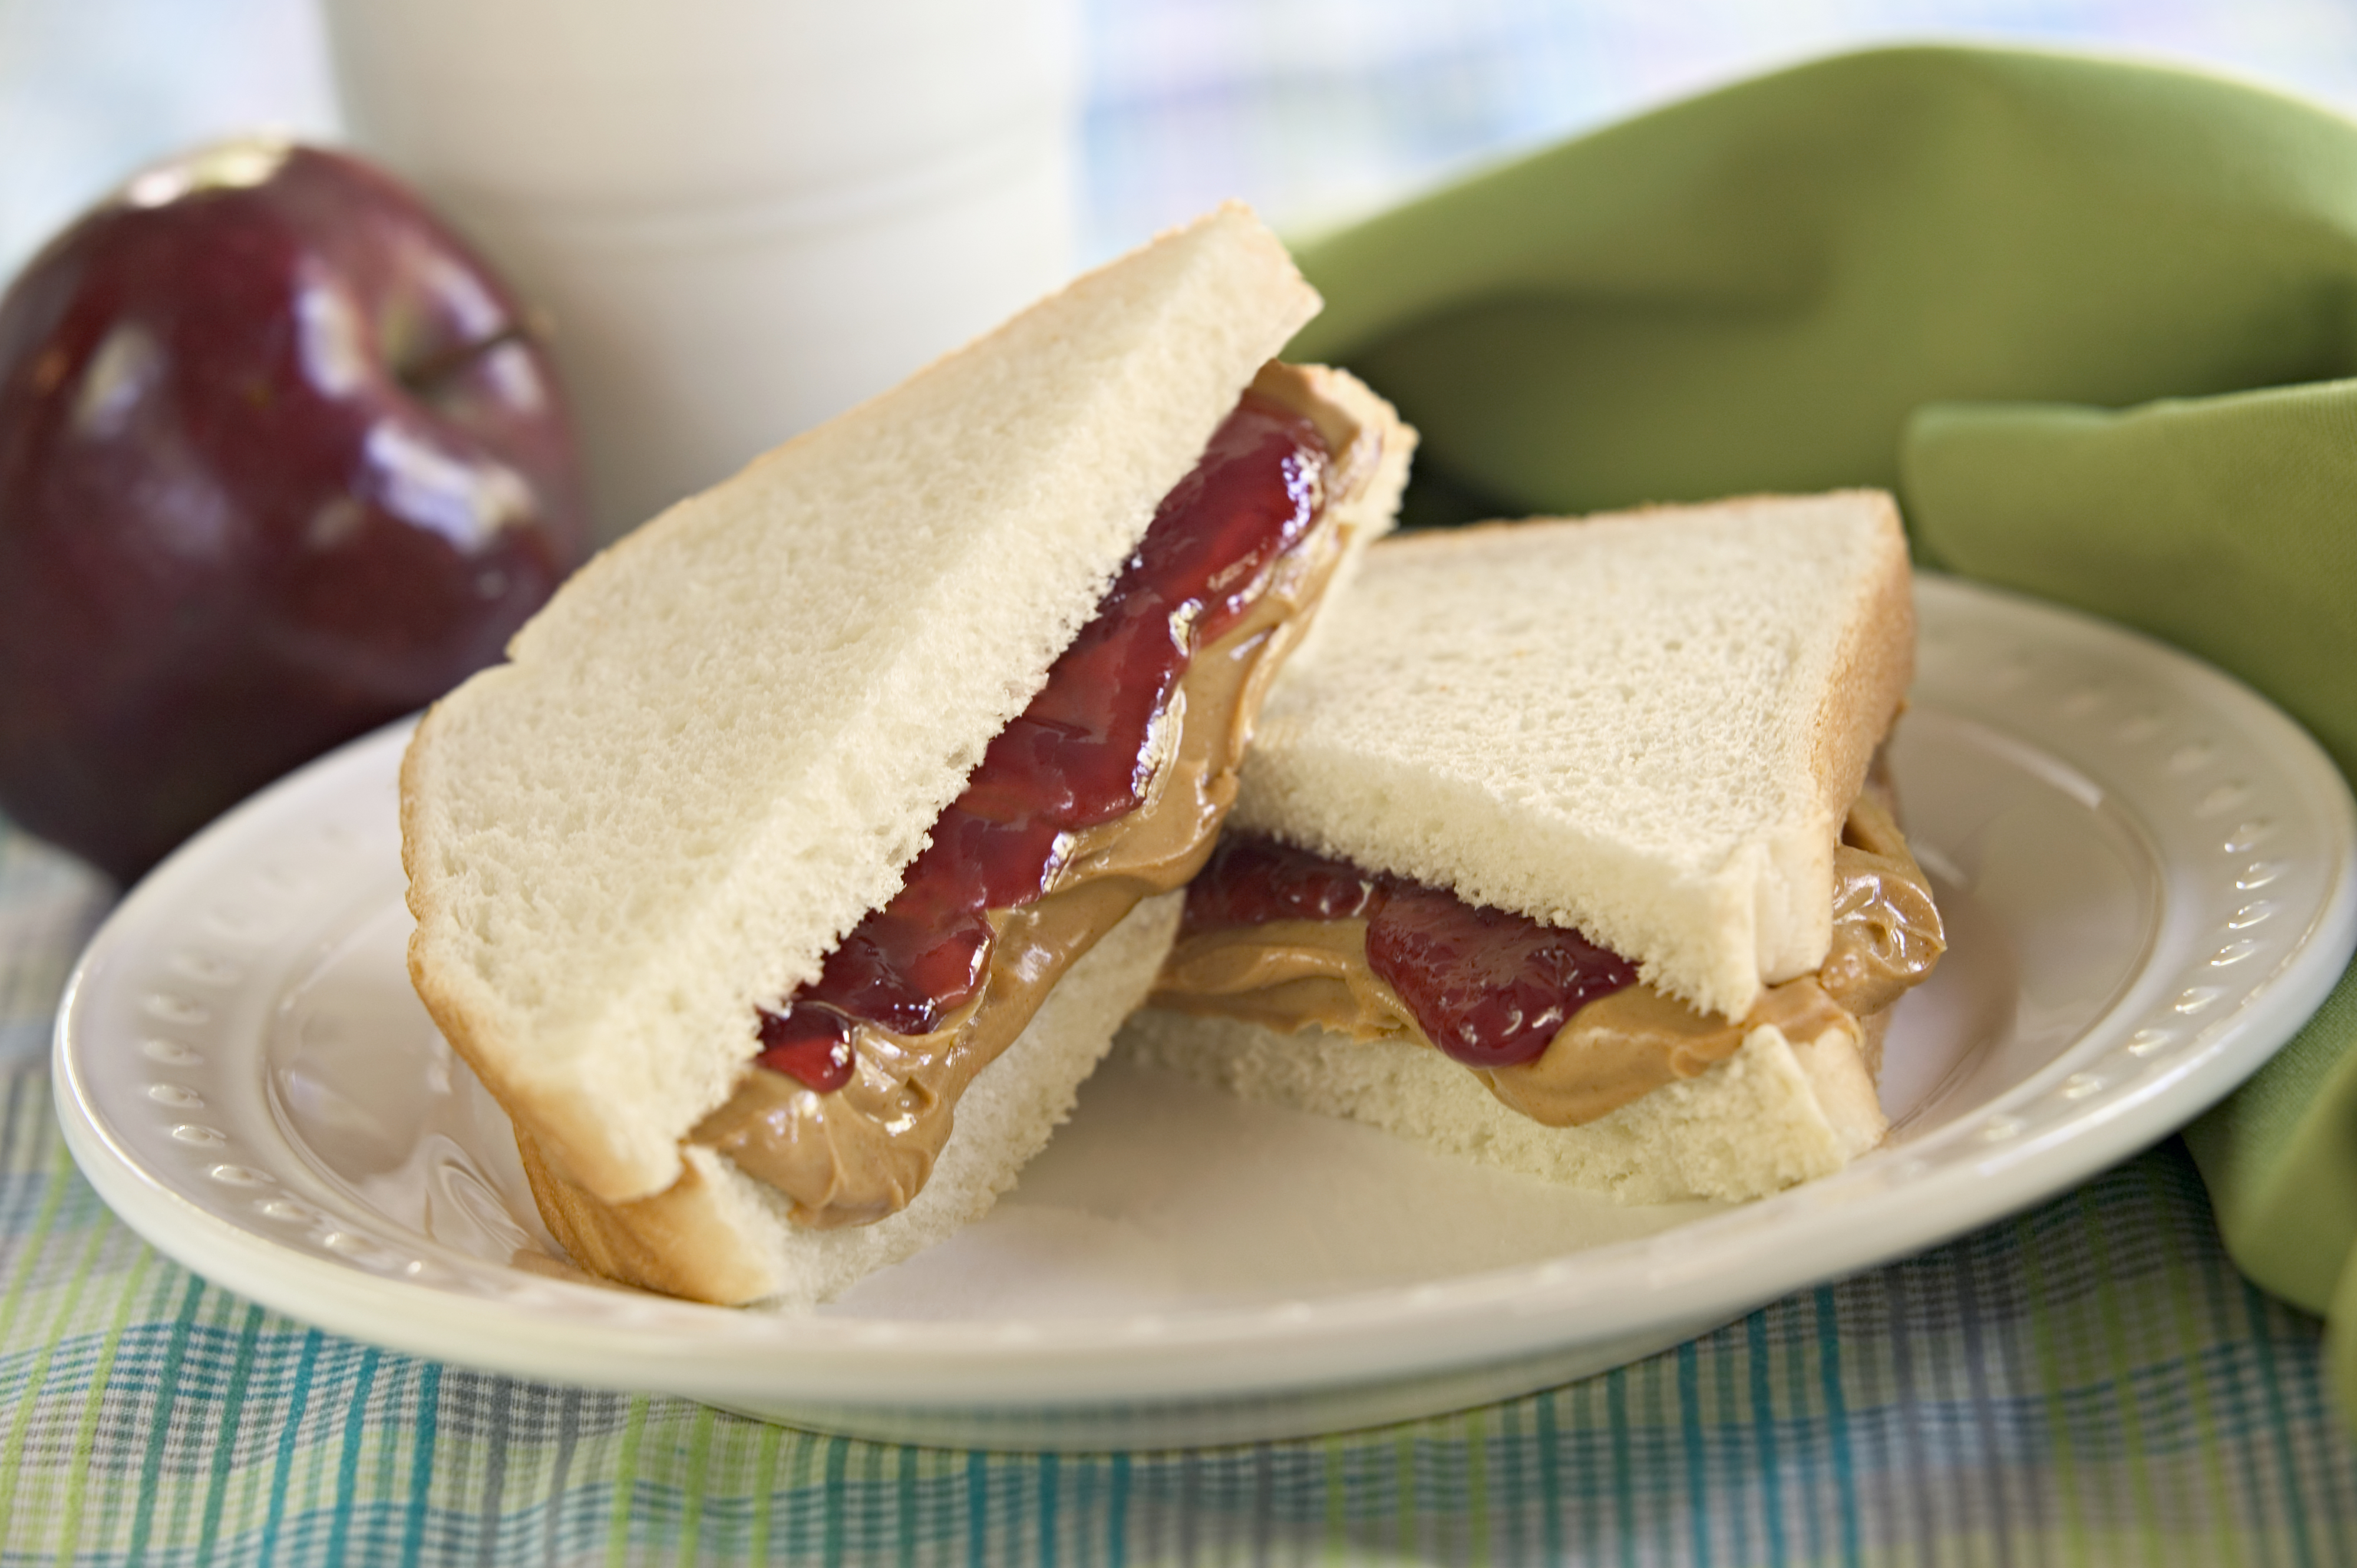 a peanut butter and jelly sandwich